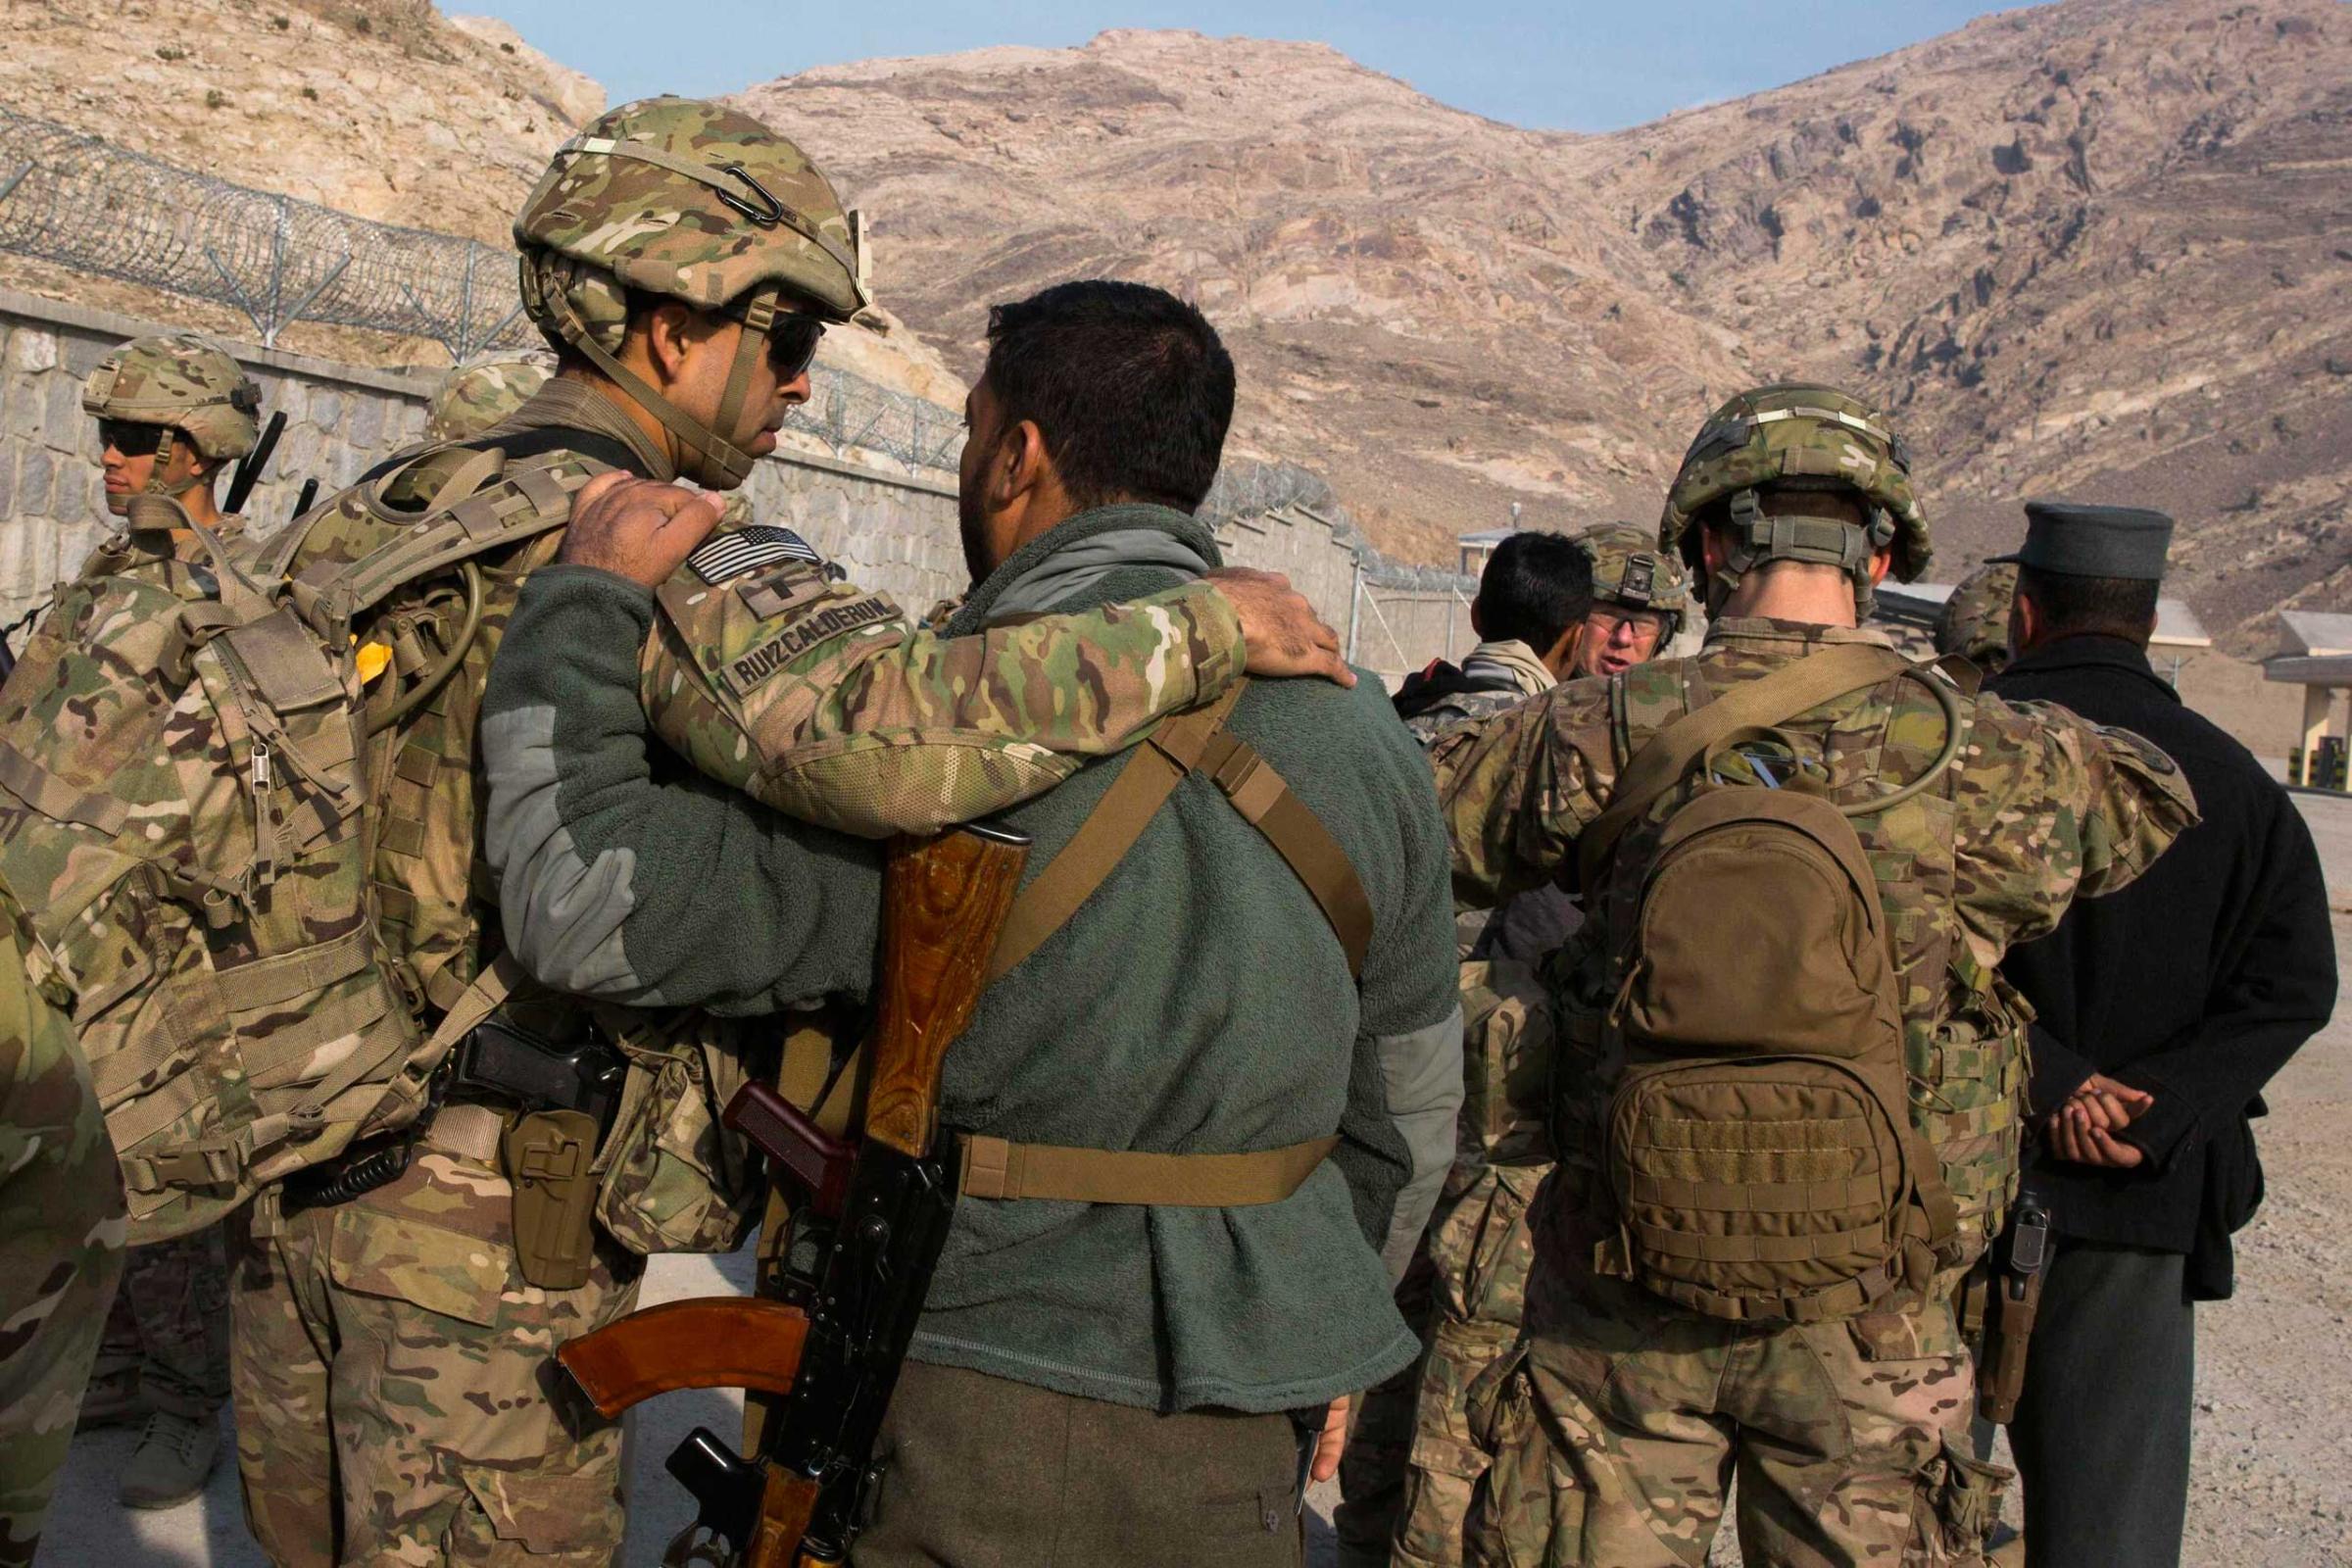 U.S. soldiers from the 3rd Cavalry Regiment greet their Afghan police counterparts during an advising mission to an Afghan police station constructed by ISAF near Jalalabad